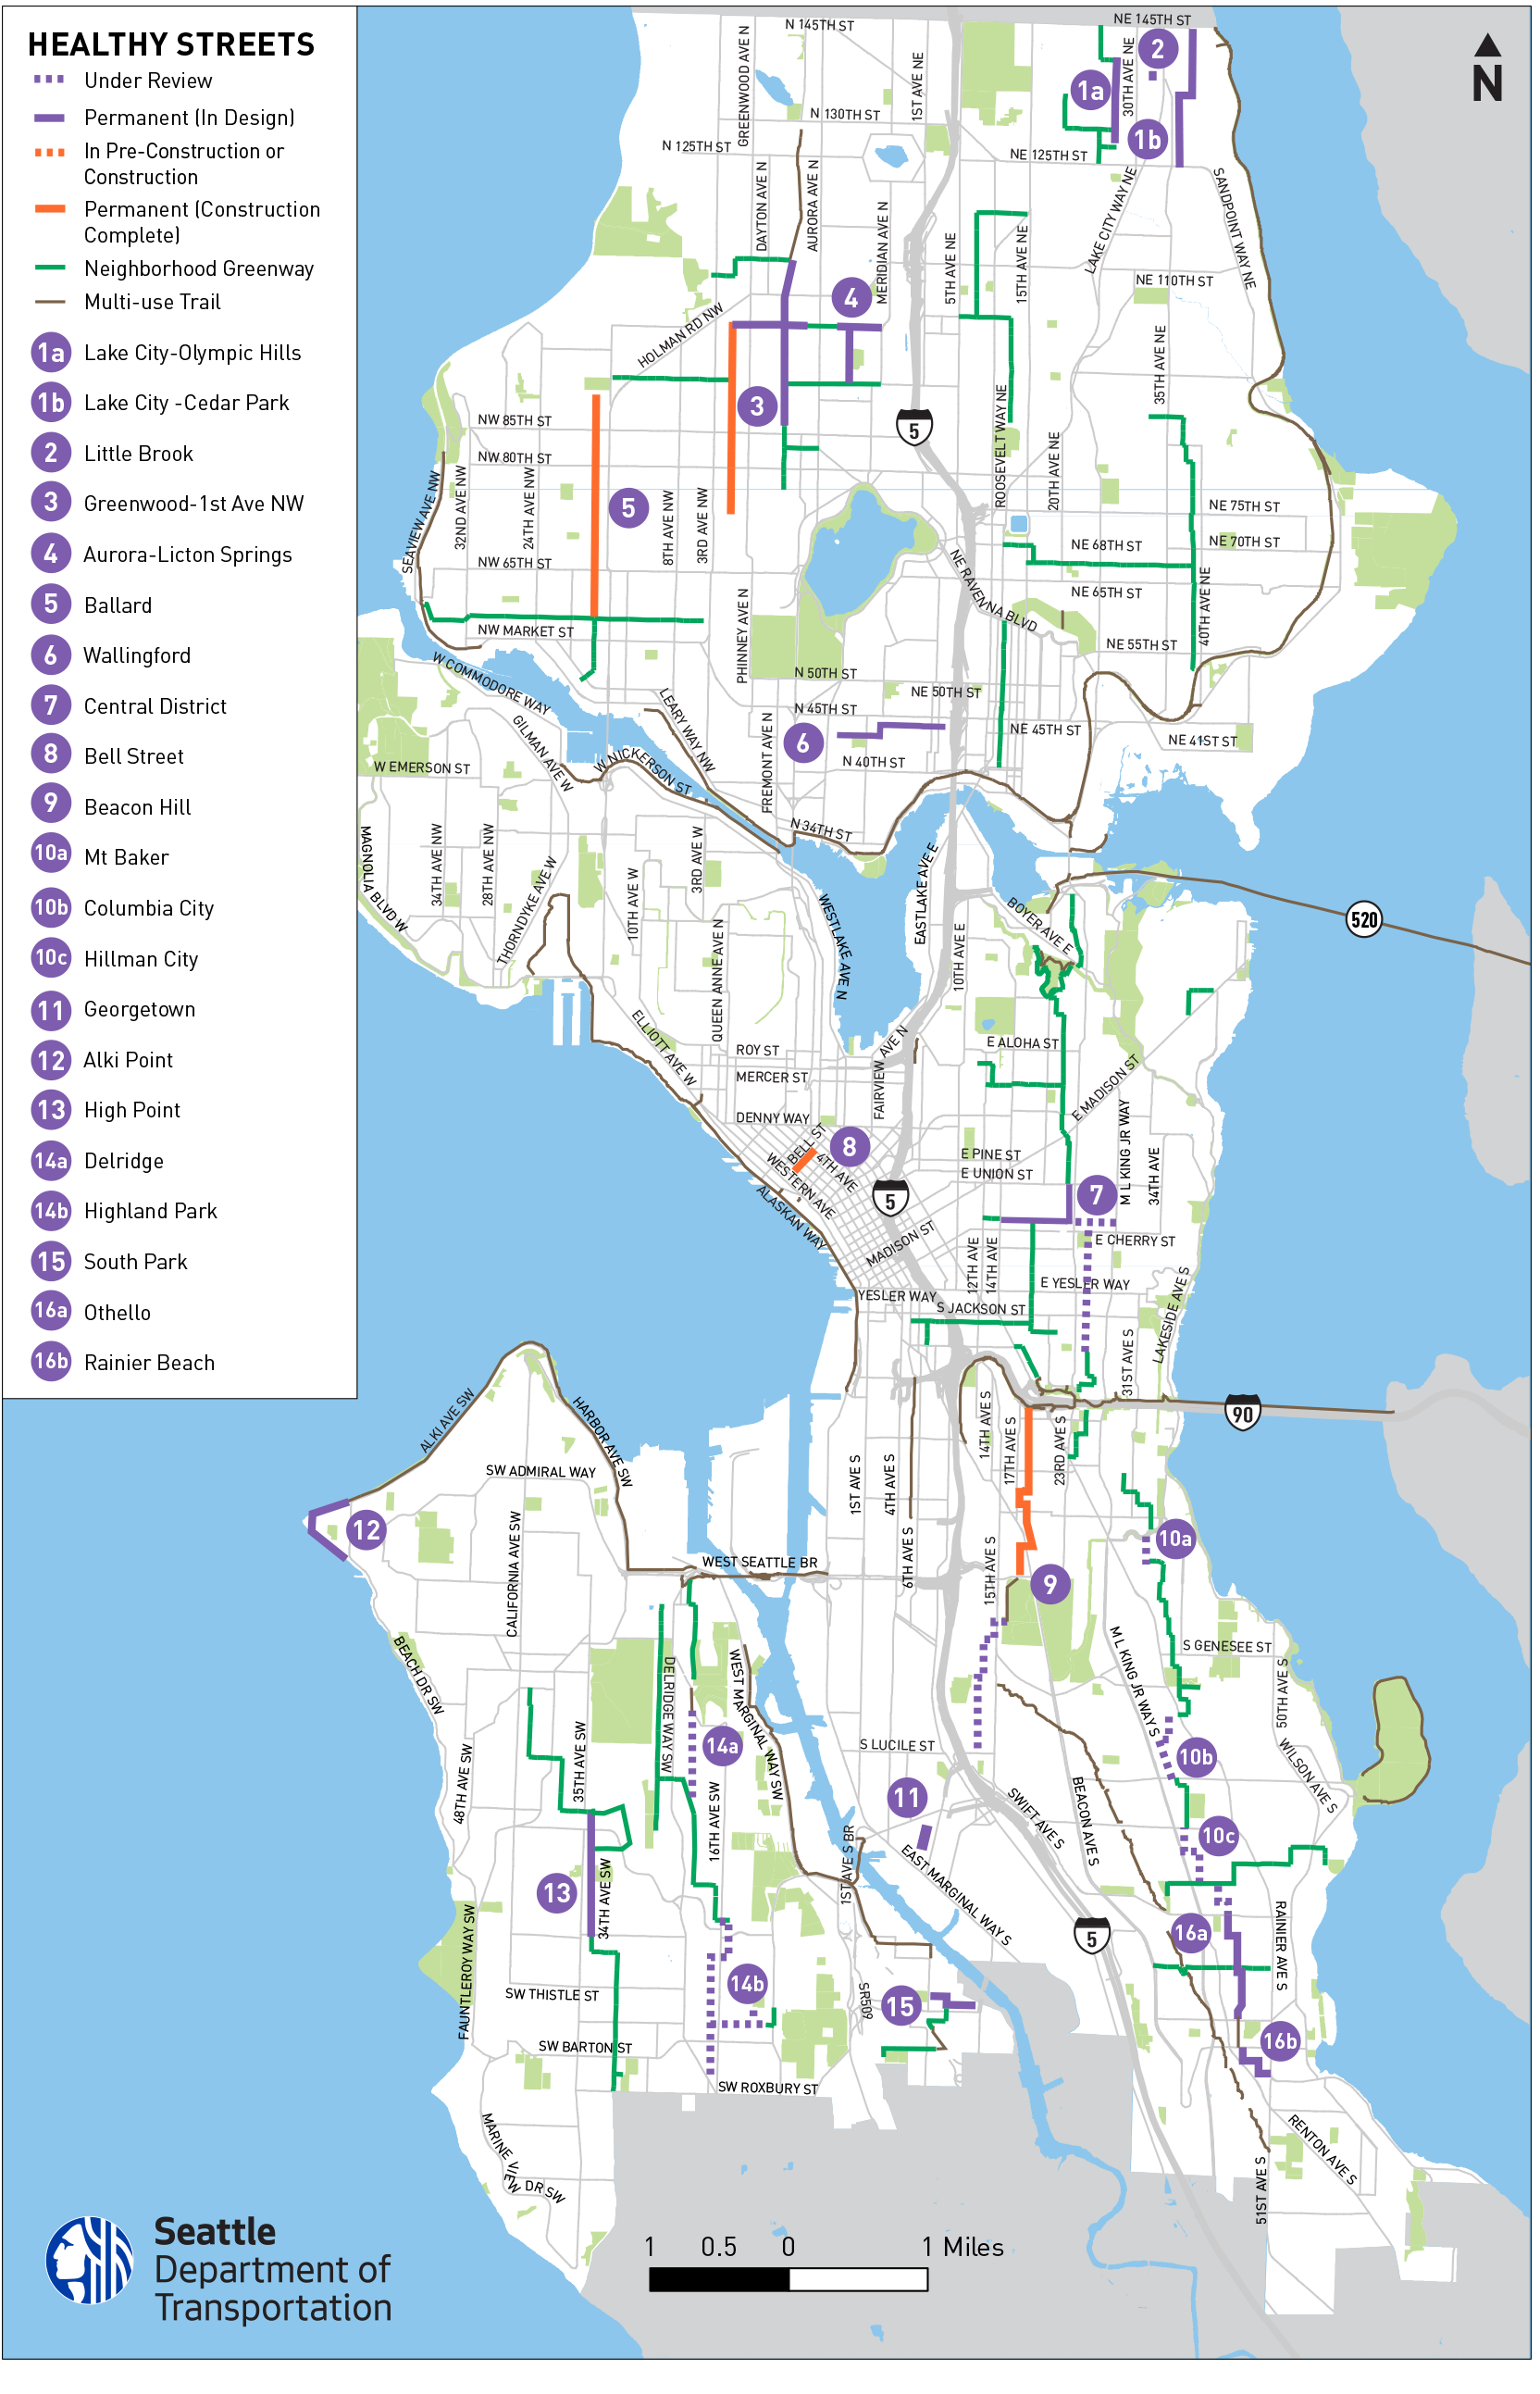 Citywide Map of Healthy Street Locations